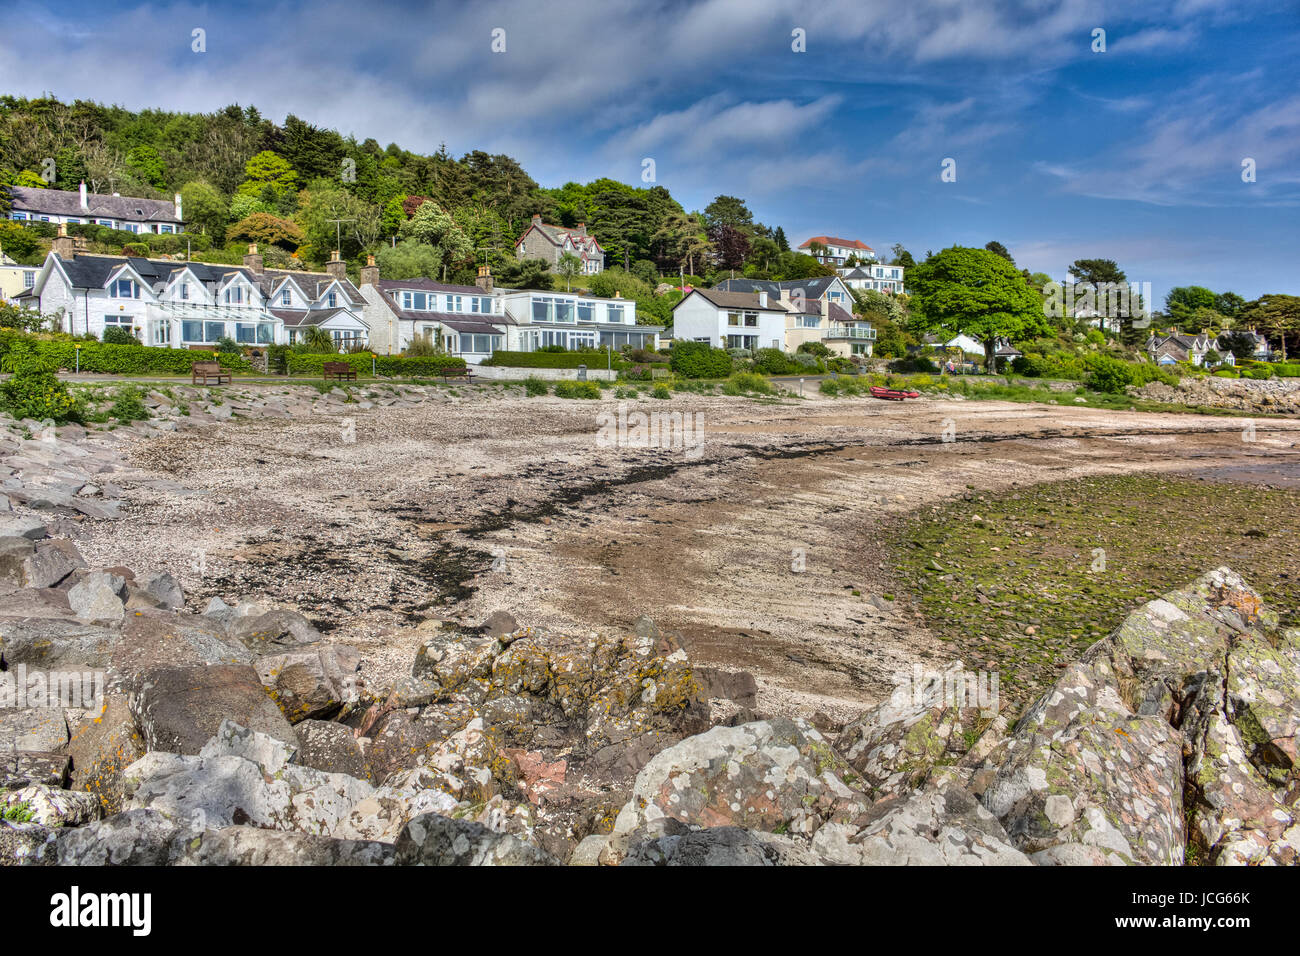 Rockcliffe Village and Beach in Spring high dynamic range image, Dumfries and Galloway, Scotland. Stock Photo